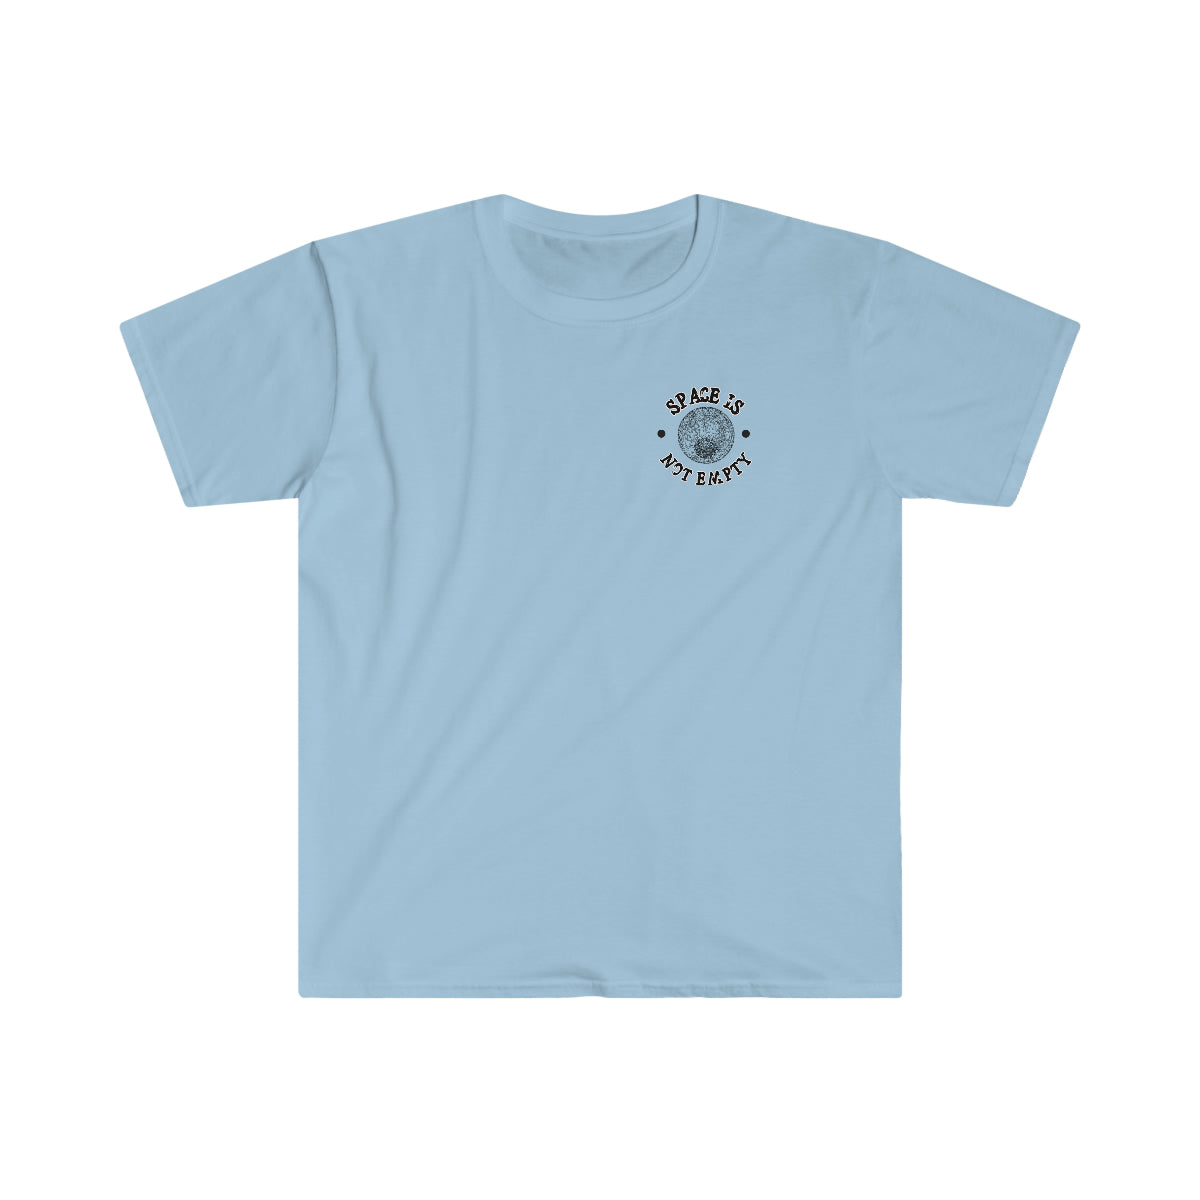 A light blue Saturn / Apollo Vehicle T-Shirt with a circle on it.